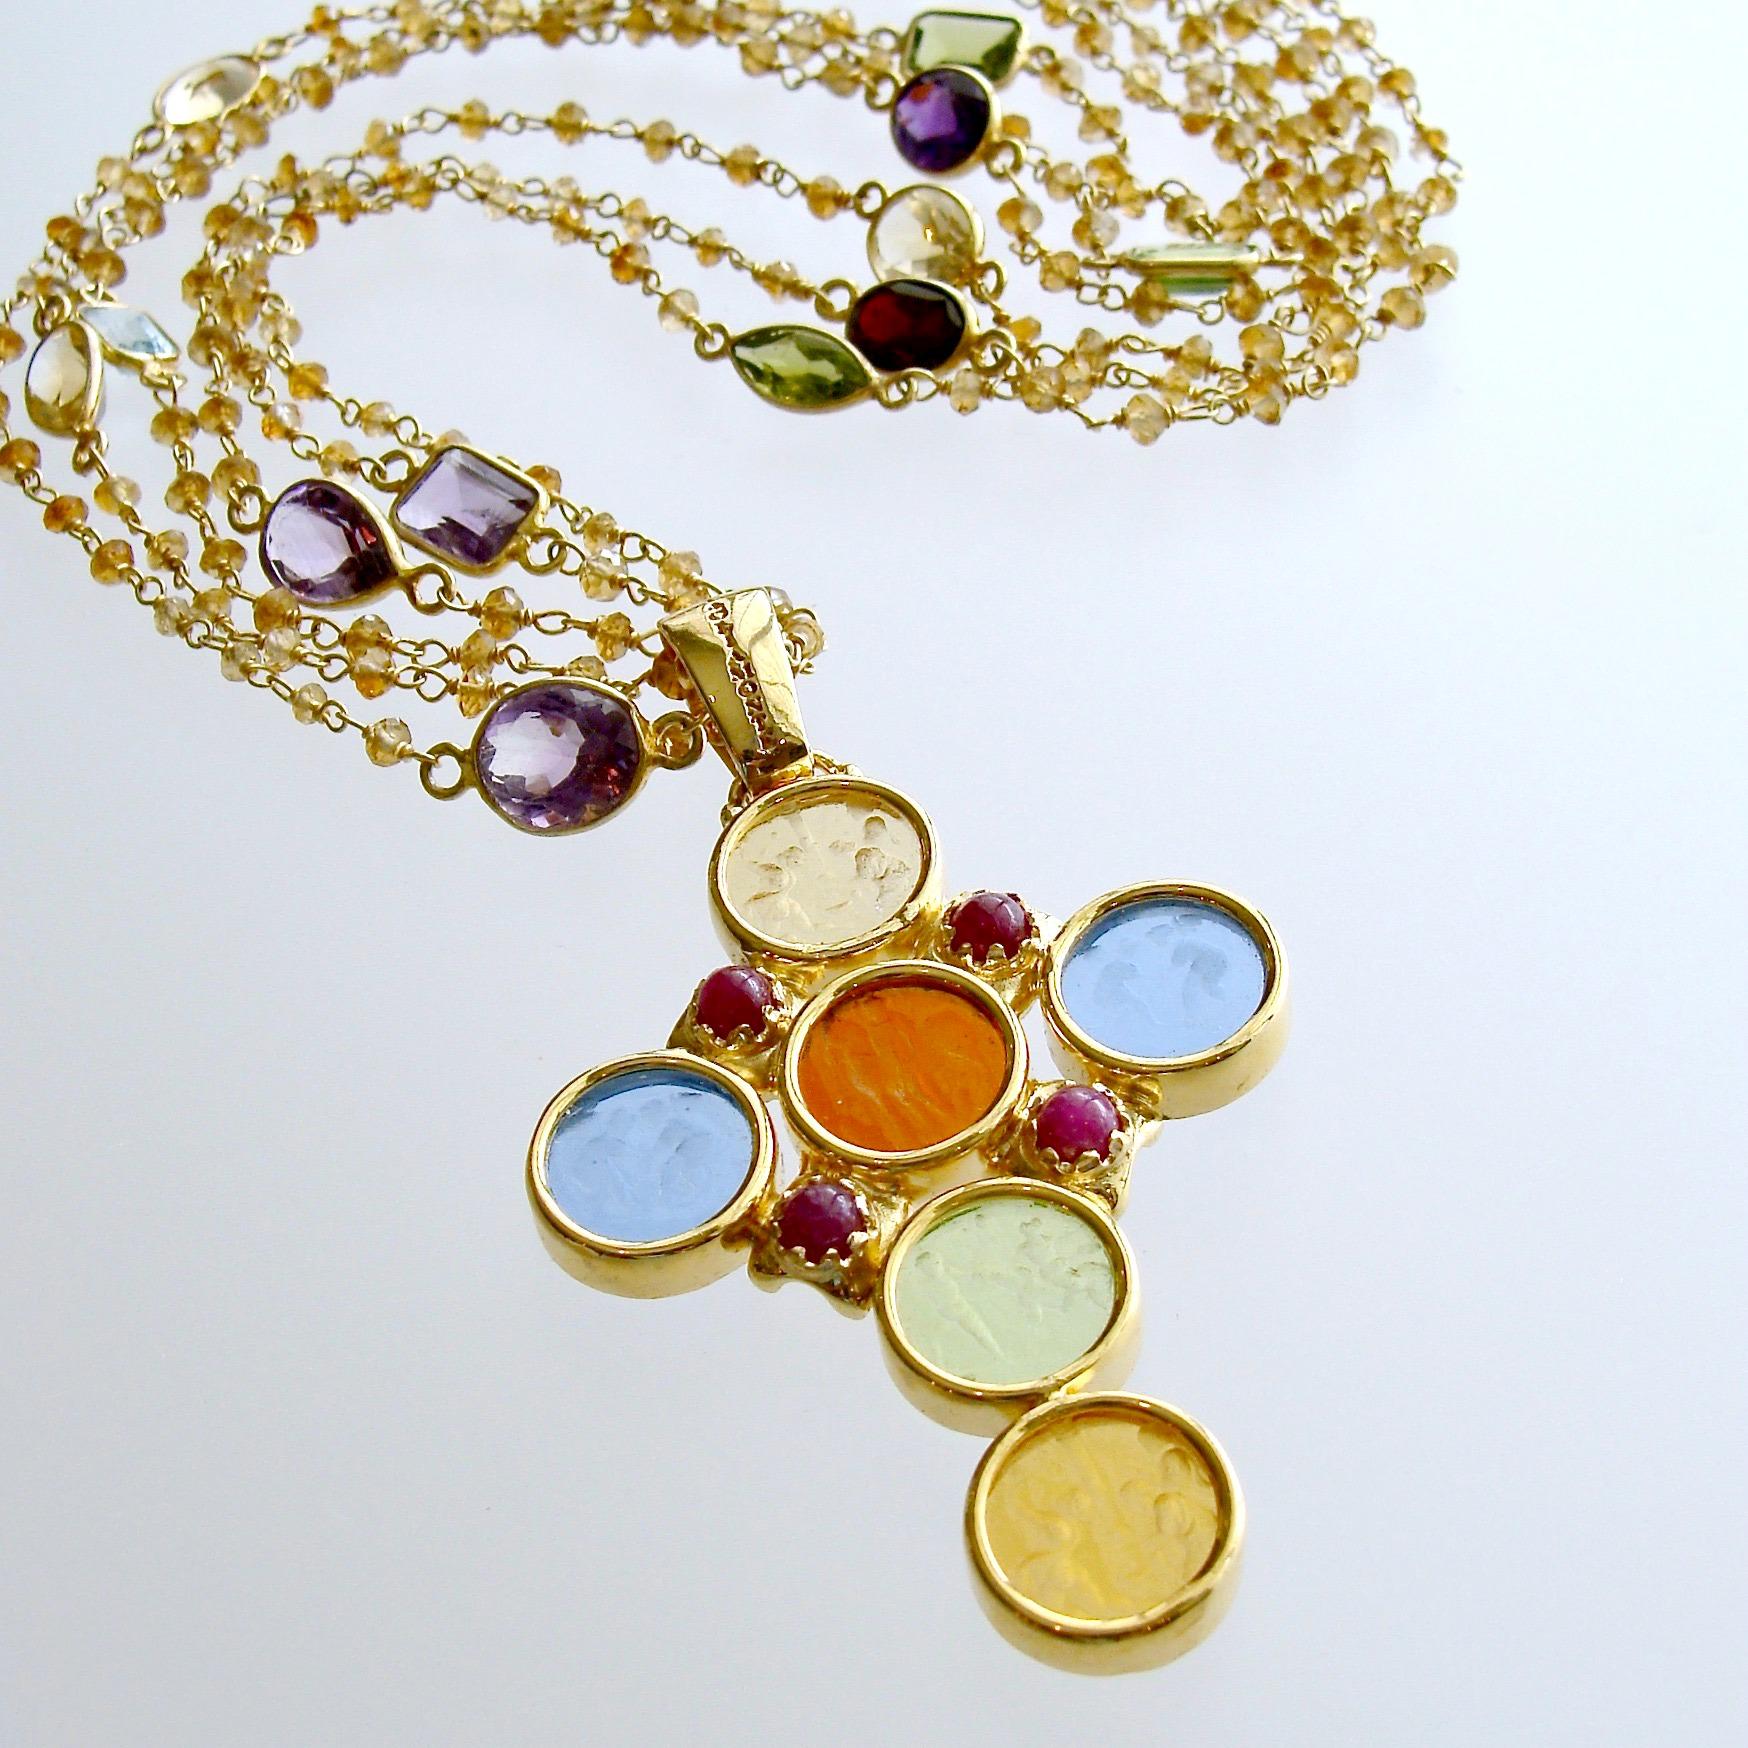 A gorgeous cross pendant consisting of six minuscule Venetian glass intaglios set in a Byzantine bezel setting and accented with rubies is the focal point of this elegant necklace.  Assorted bezel gemstone connectors of citrine, blue topaz, peridot,